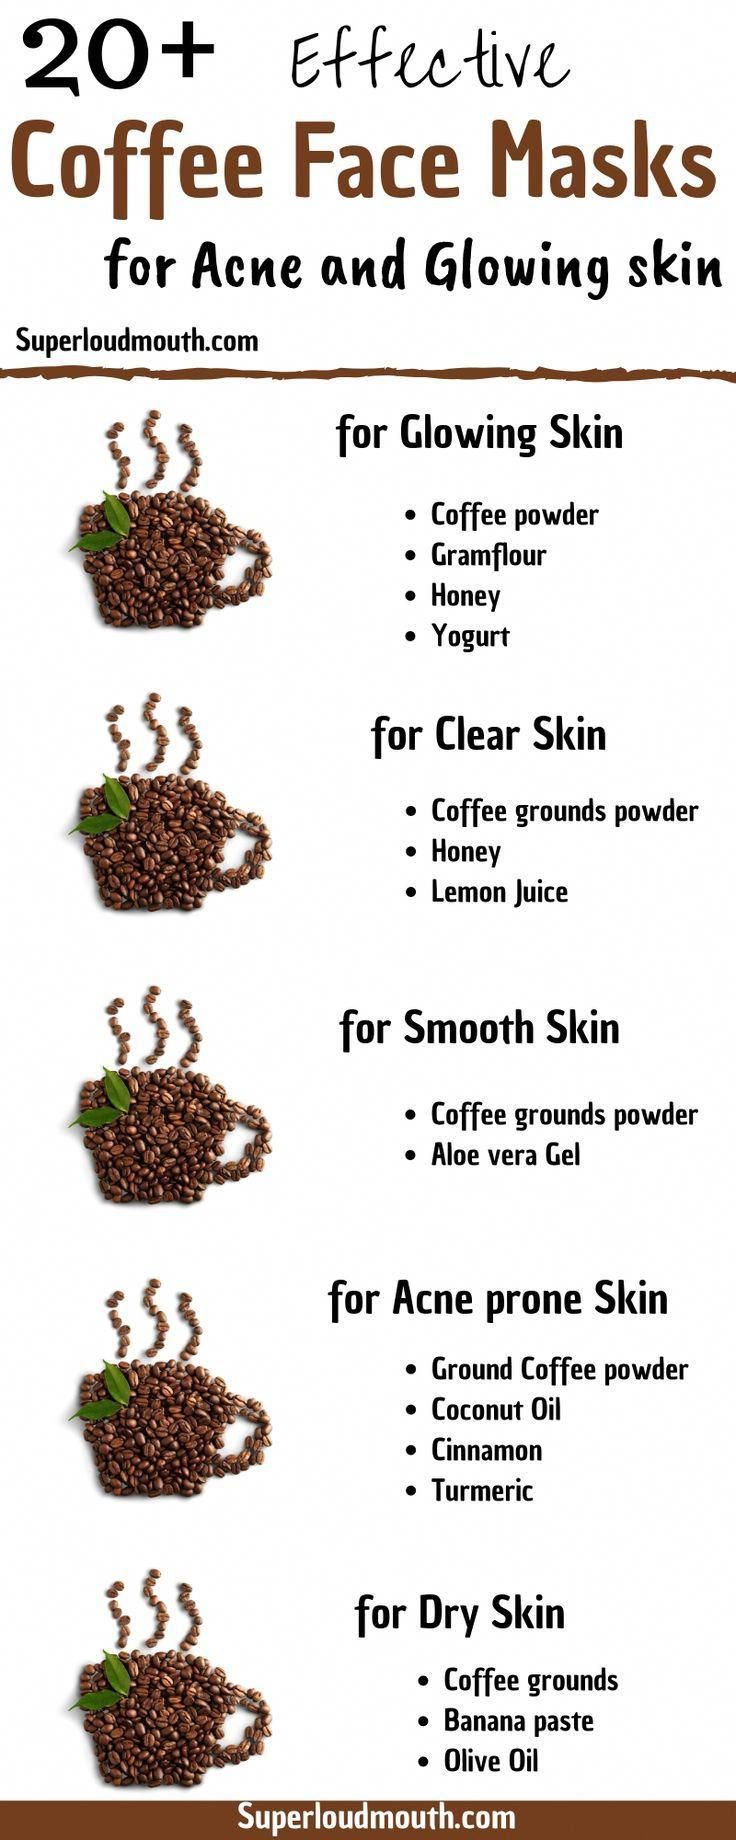 20+ Coffee face mask recipes for Acne, Glowing skin and other skin issues -   17 diy Face Mask natural ideas